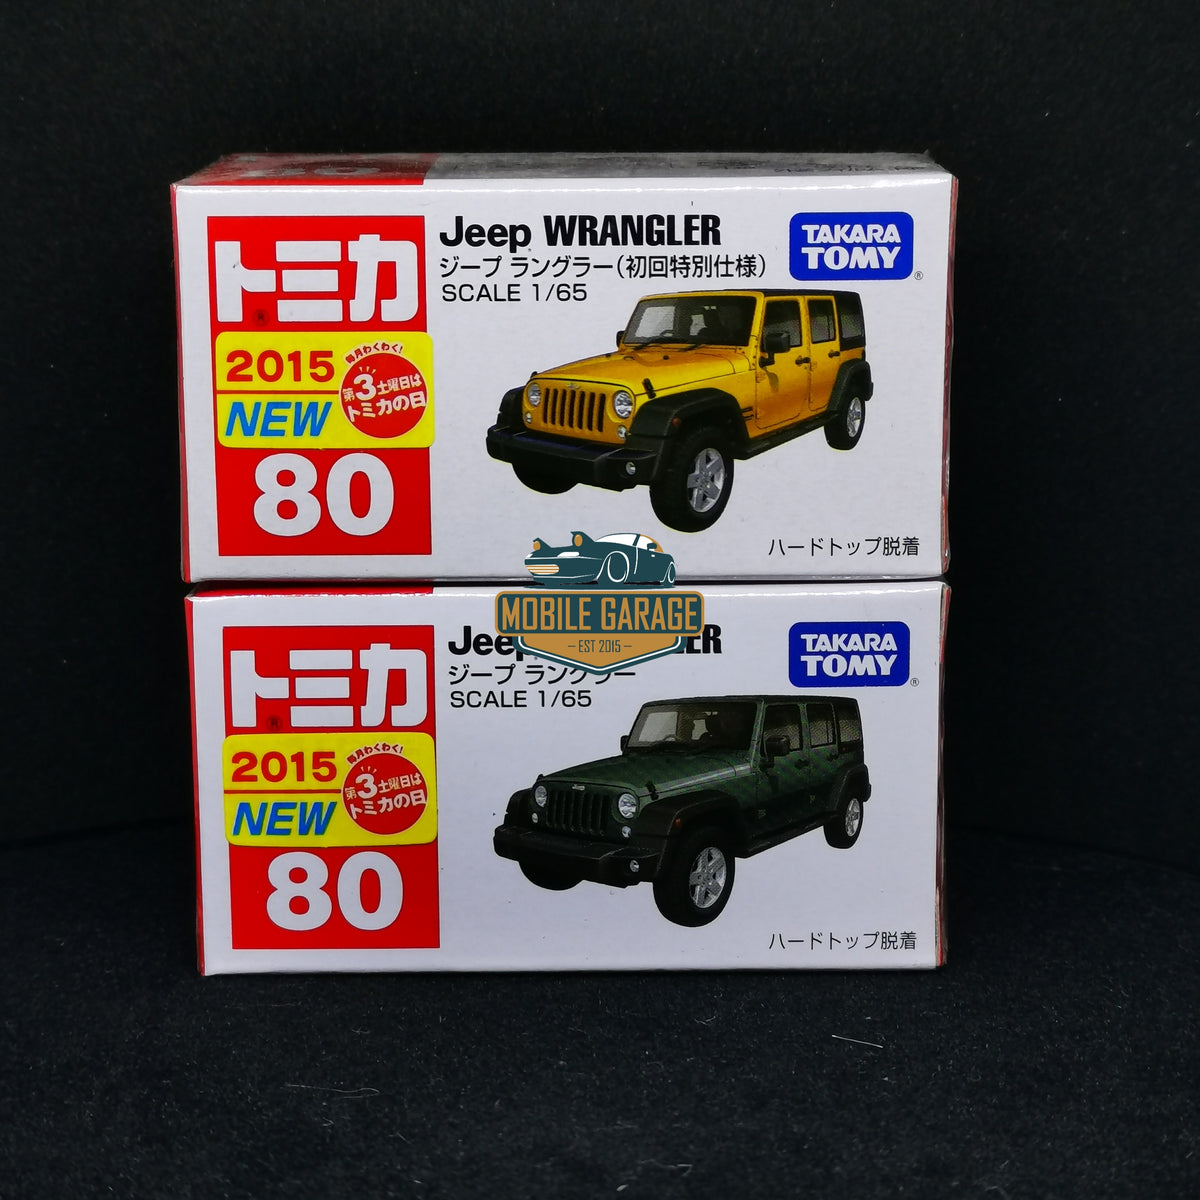 TOMICA #80 Jeep Wrangler 1:65 SCALE set of Two – Mobile Garage HK